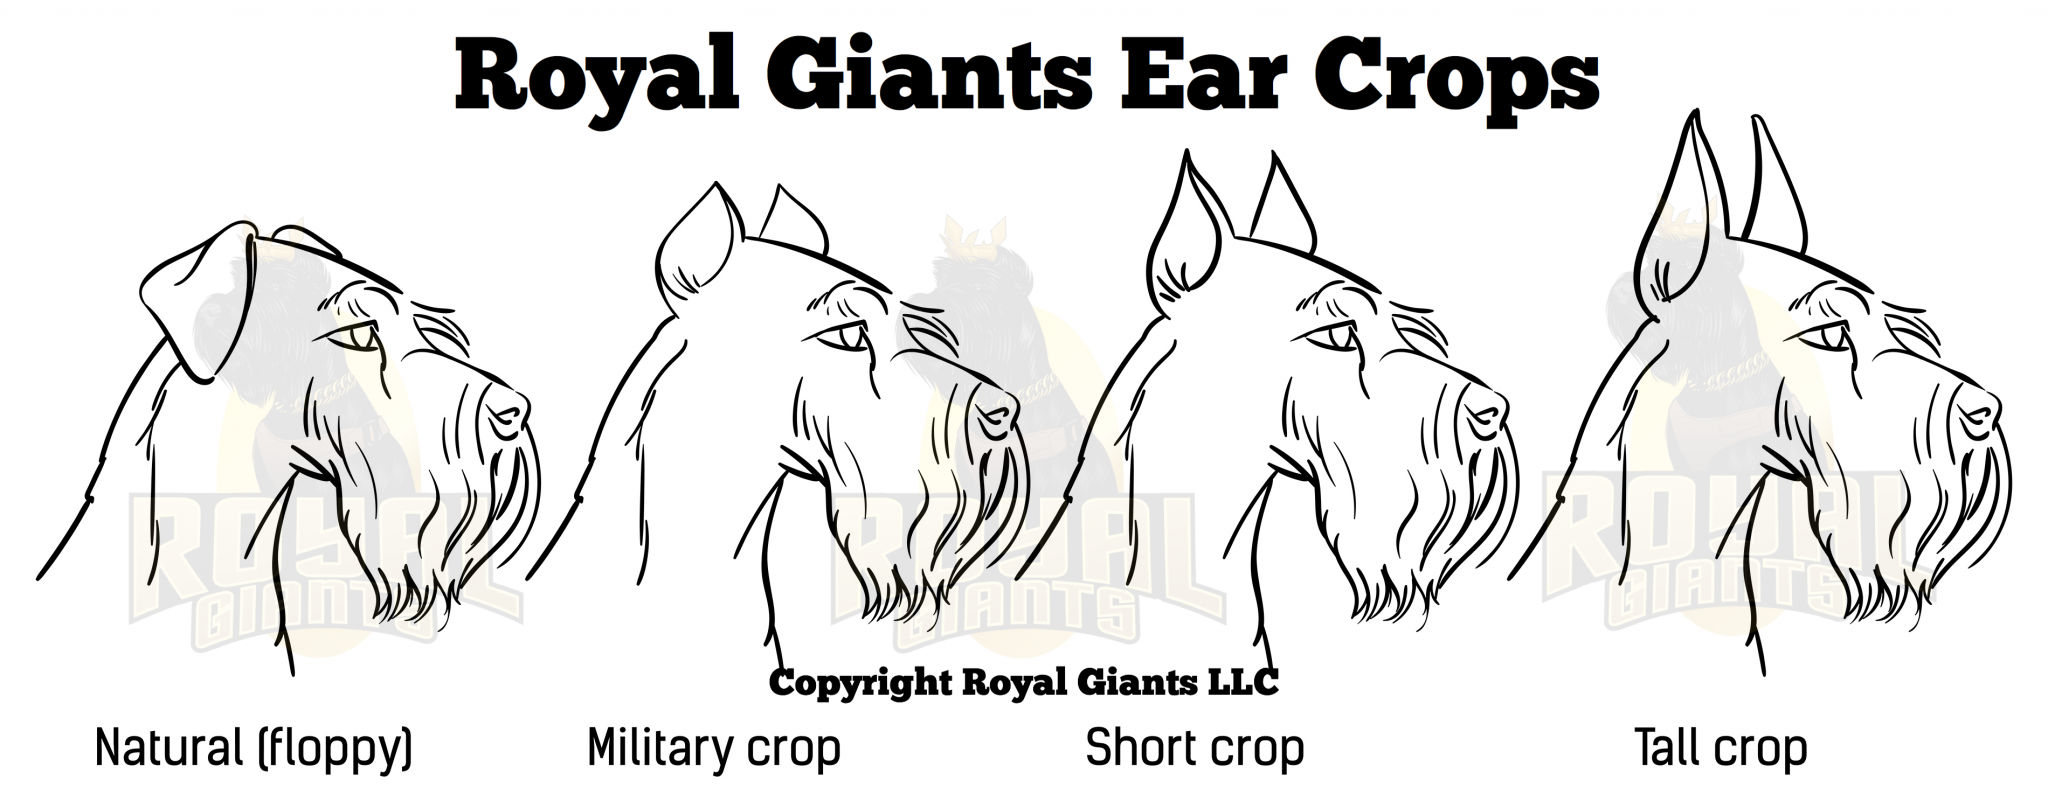 Giant Schnauzer Ear Cropping The What and How’s Royal Giants